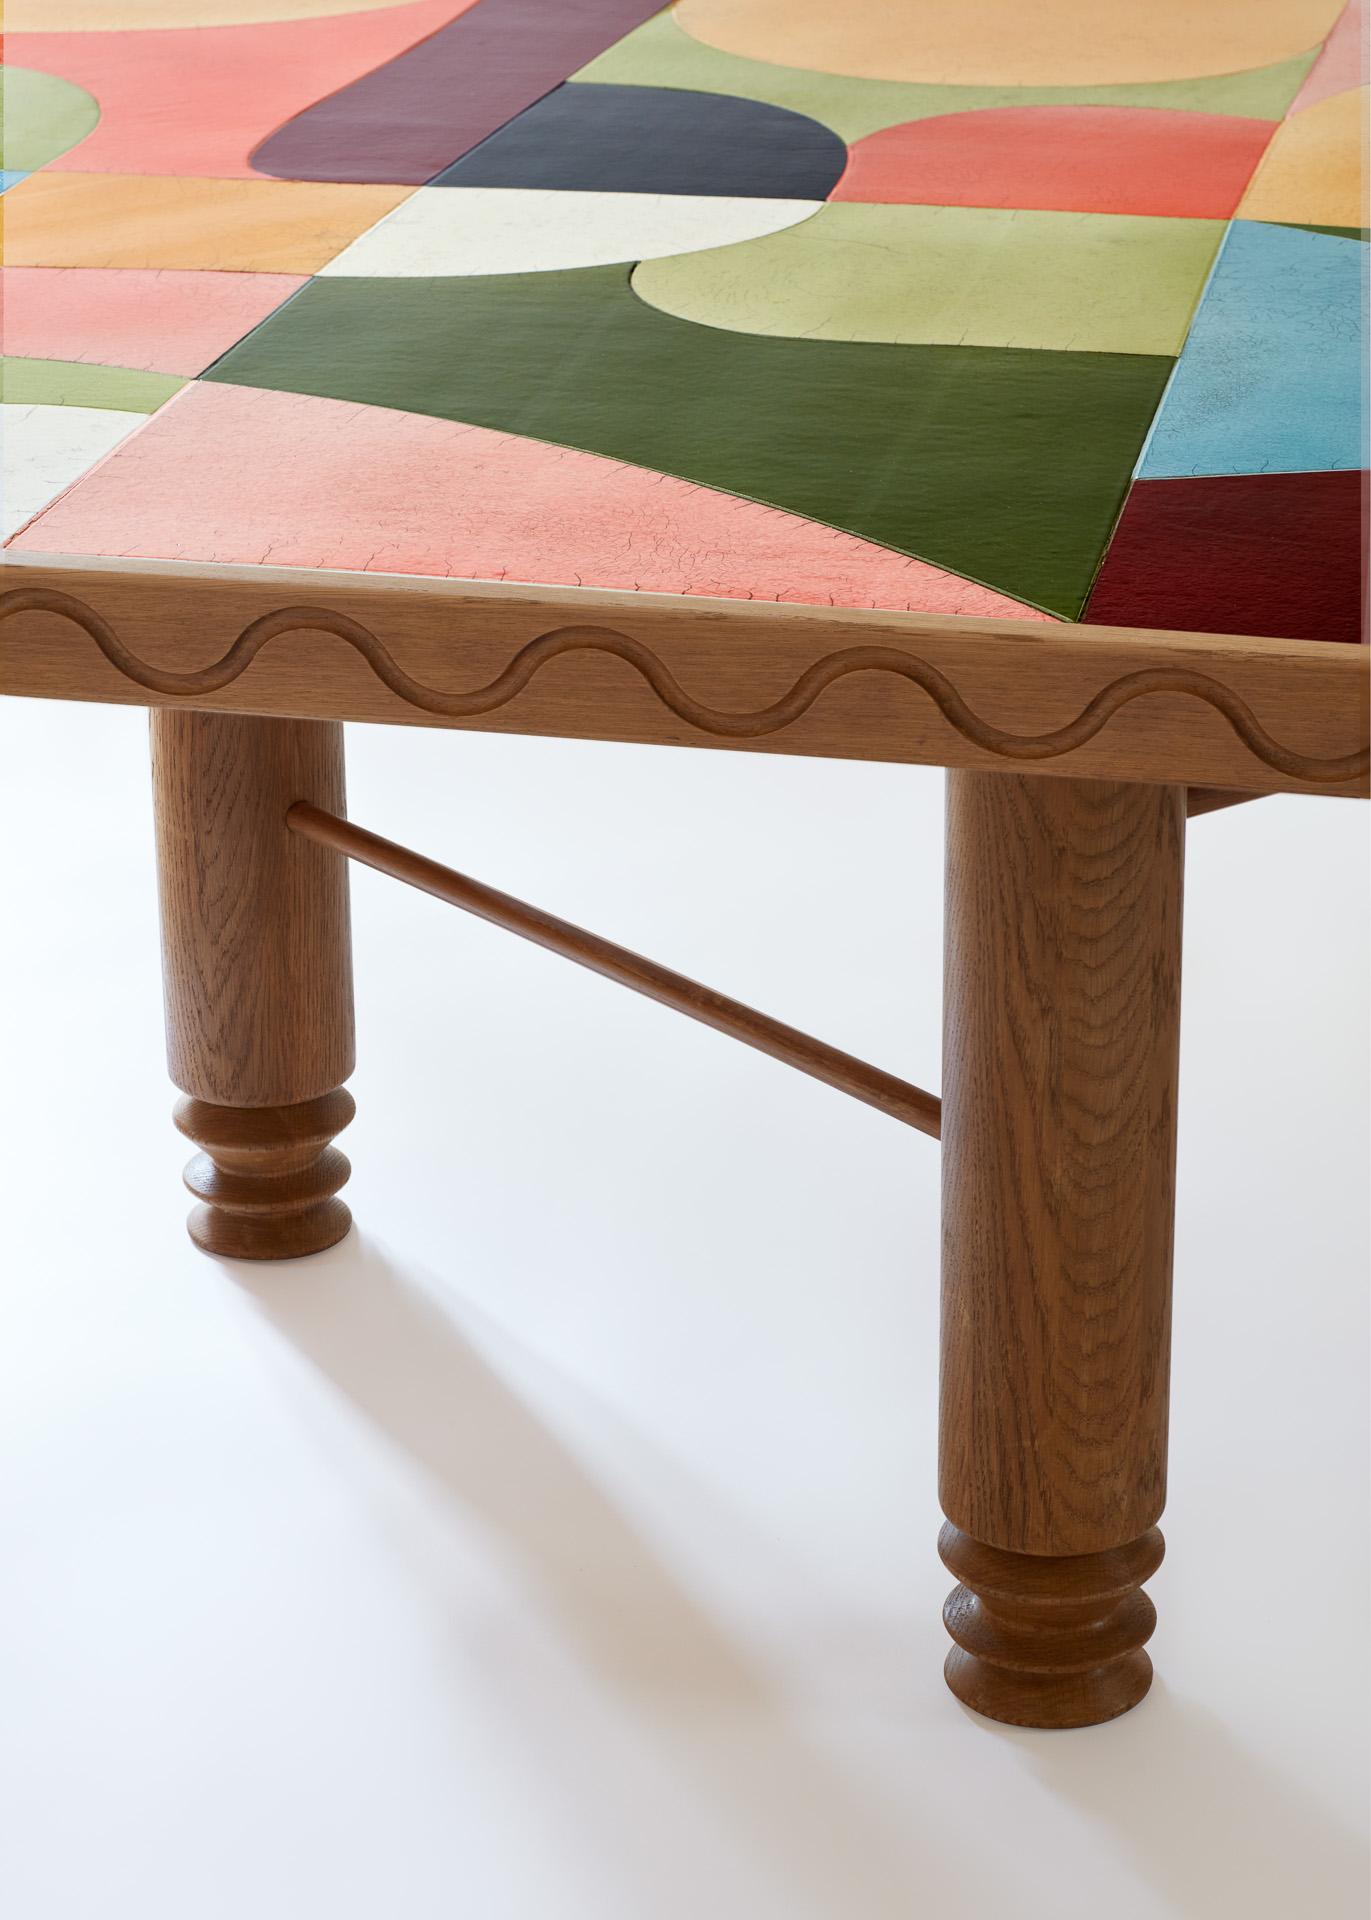 Rainbow wooden table with a colorful puzzle top with Avant-Garde patterns, designed by Laura GONZALEZ.
Turned legs and carved frame in sandblasted golden oak, precious table top in Raku marquetry, Japanese ceramic.
    